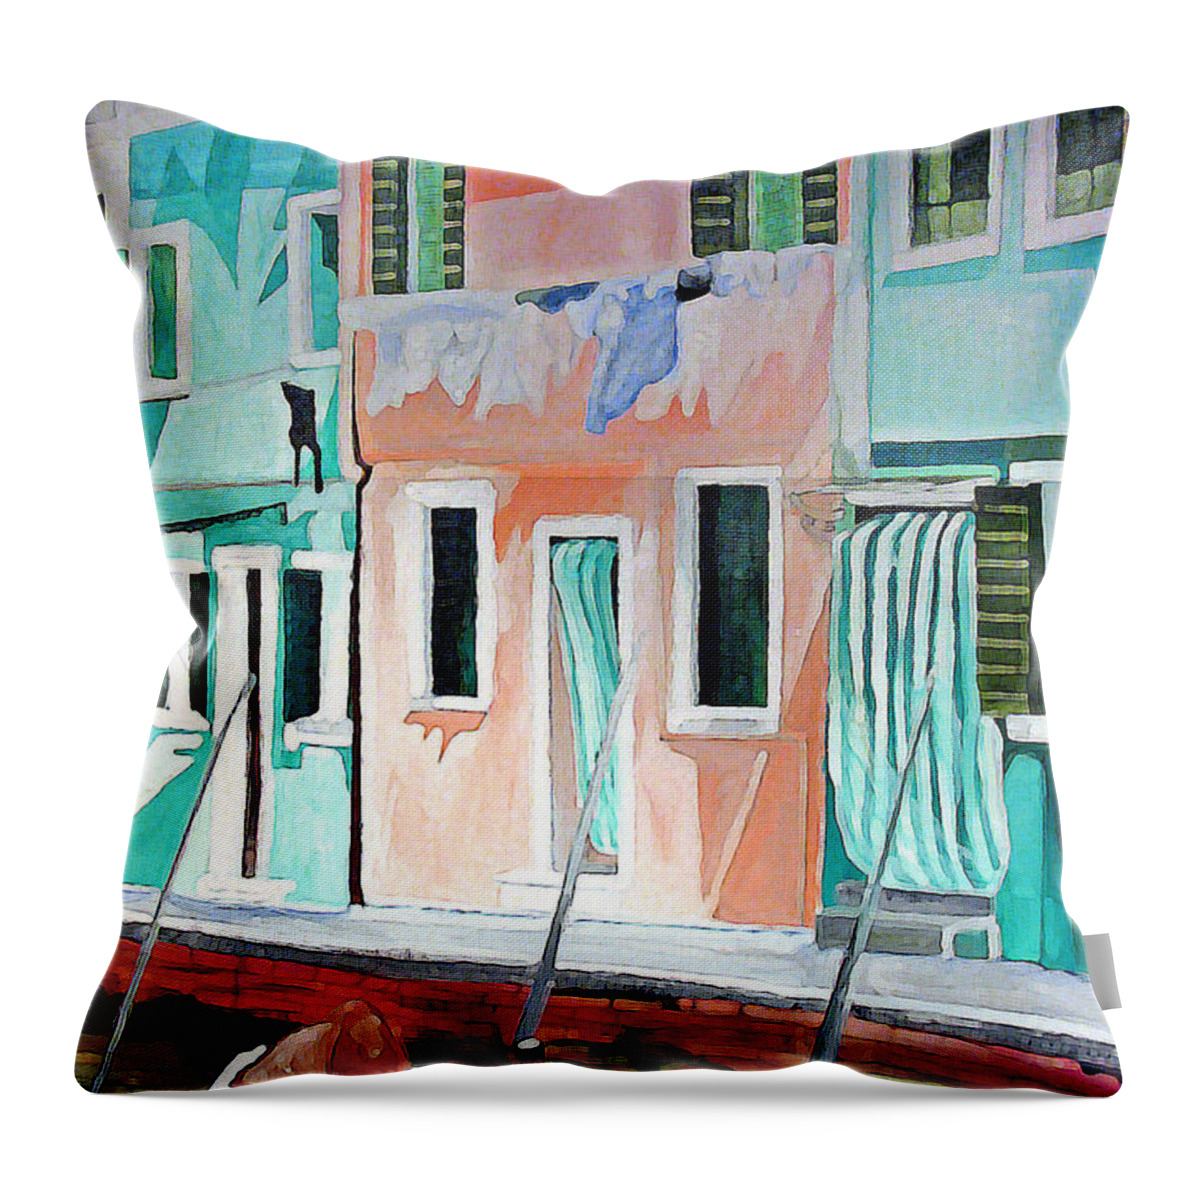 Italy Throw Pillow featuring the painting A Day In Burrano by Patricia Arroyo